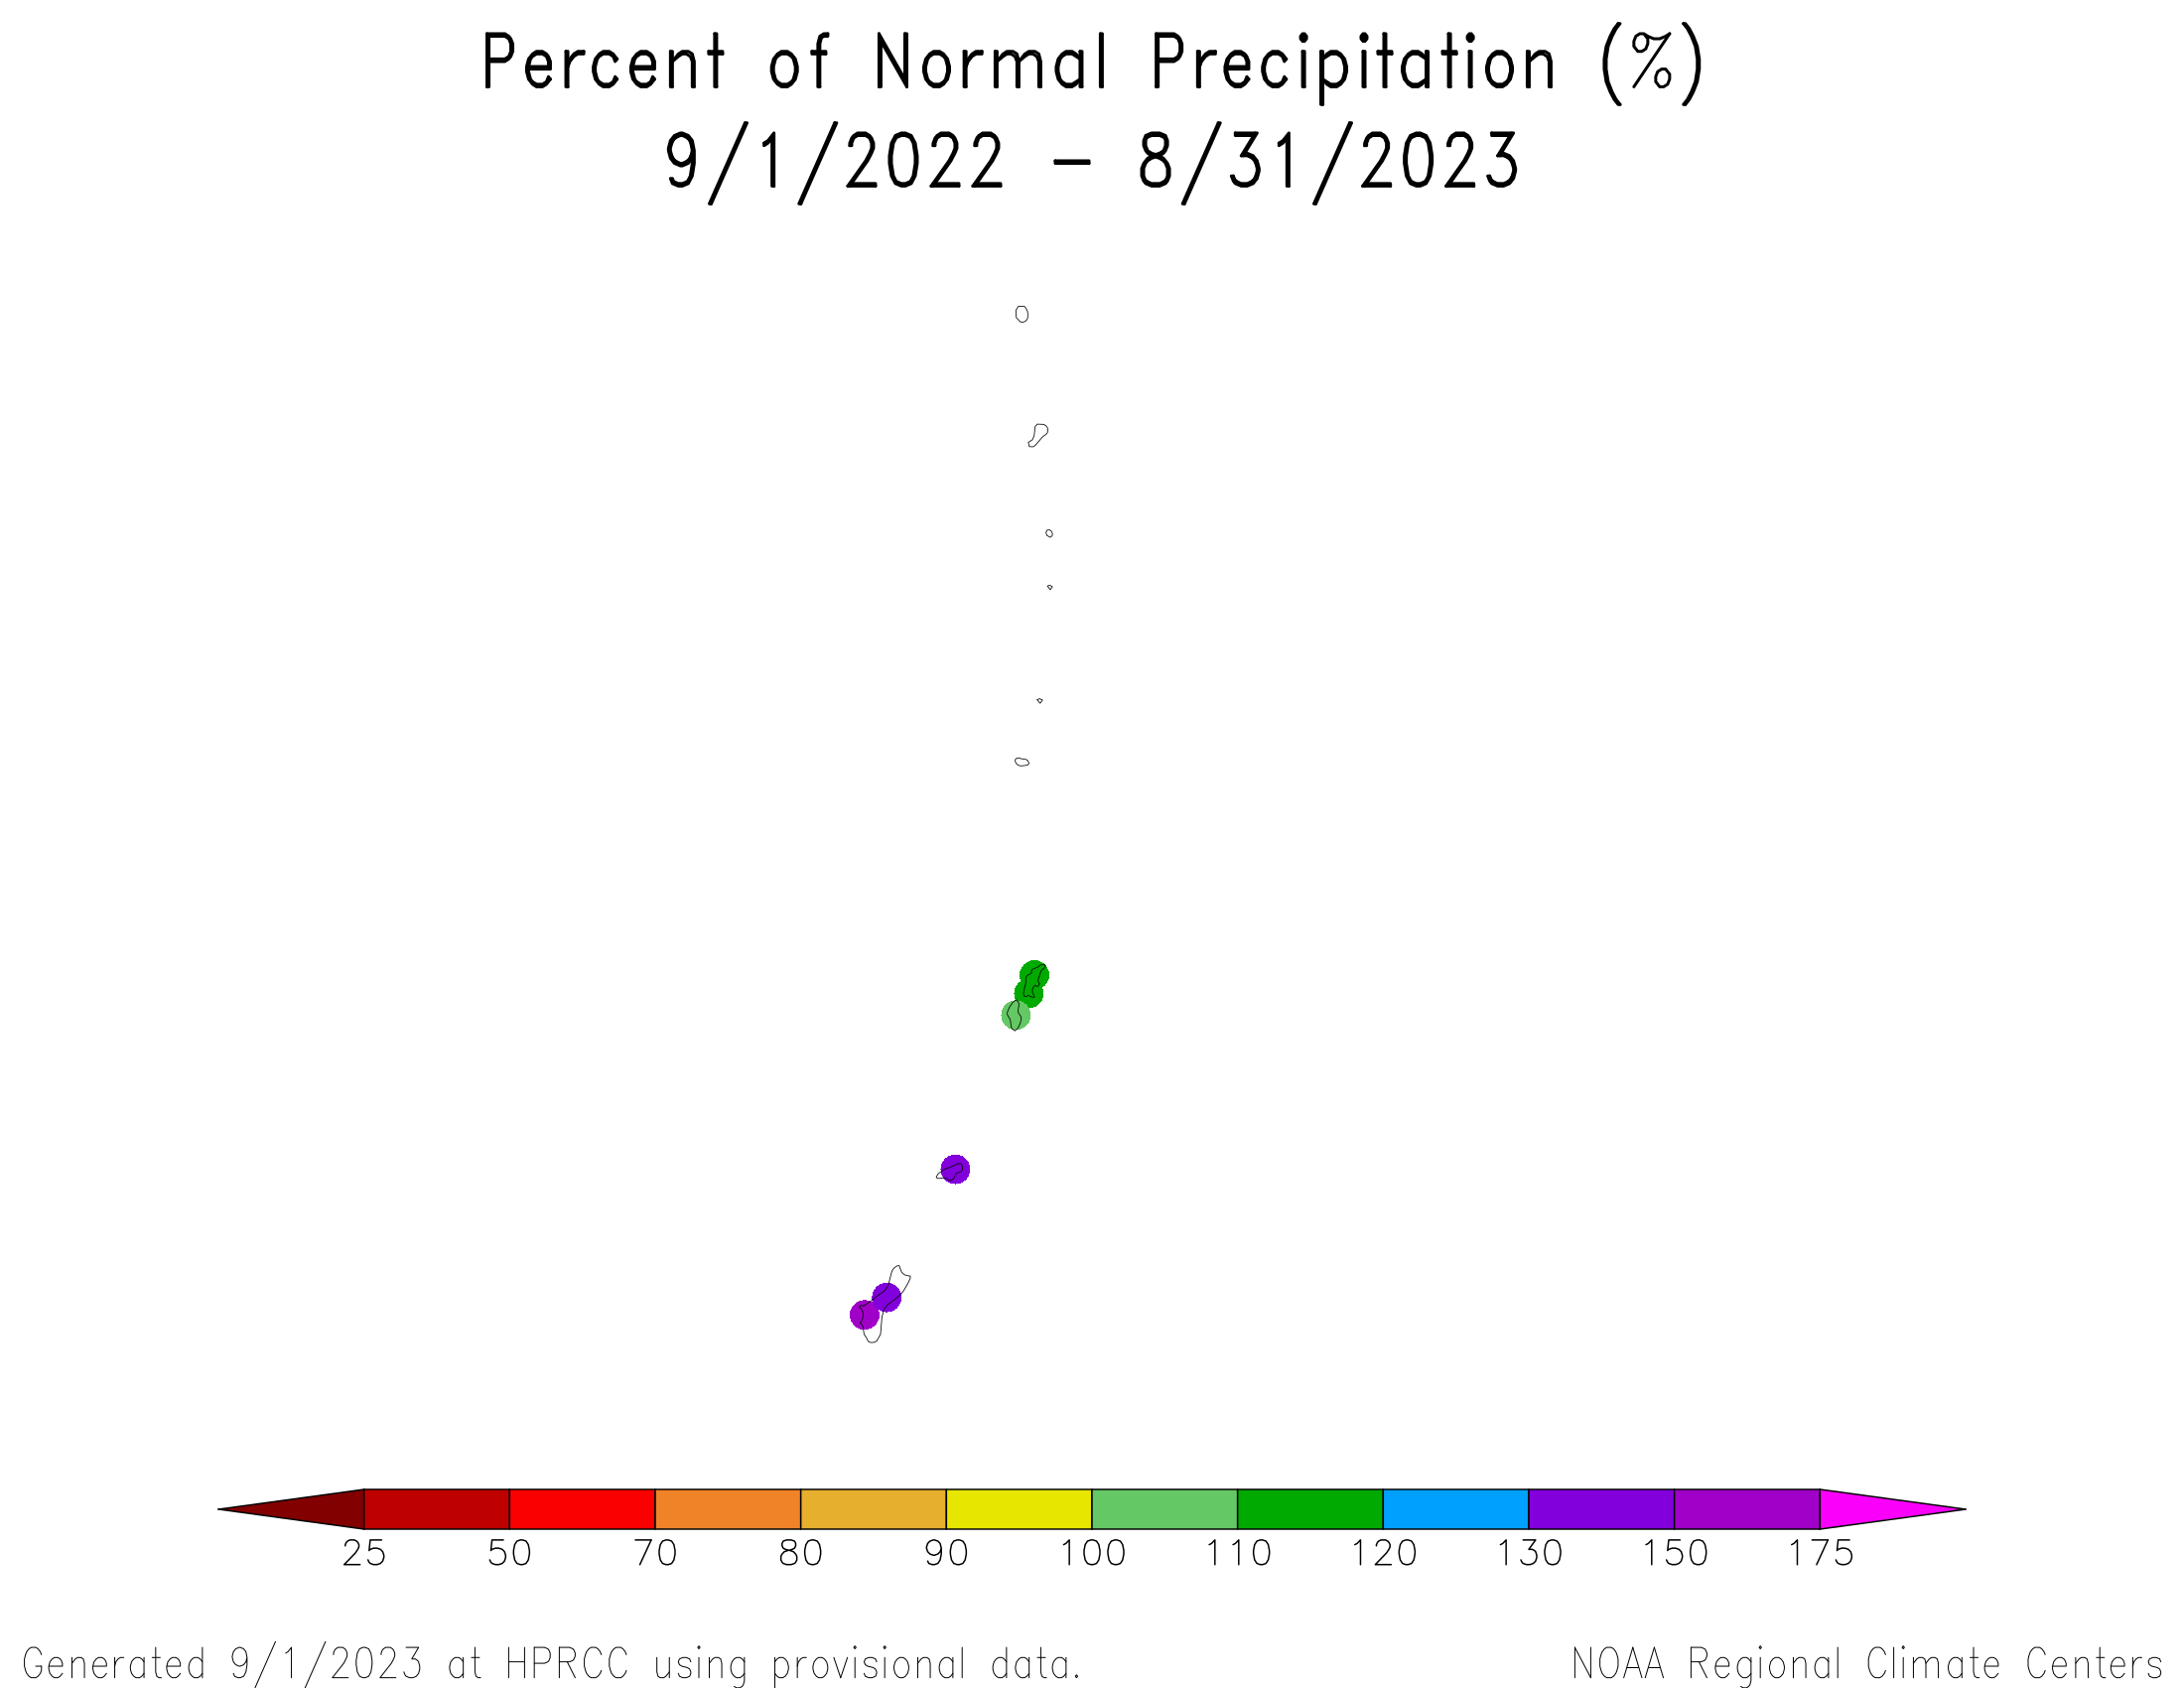 September 2022-August 2023 Percent of Normal Precipitation for the Marianas